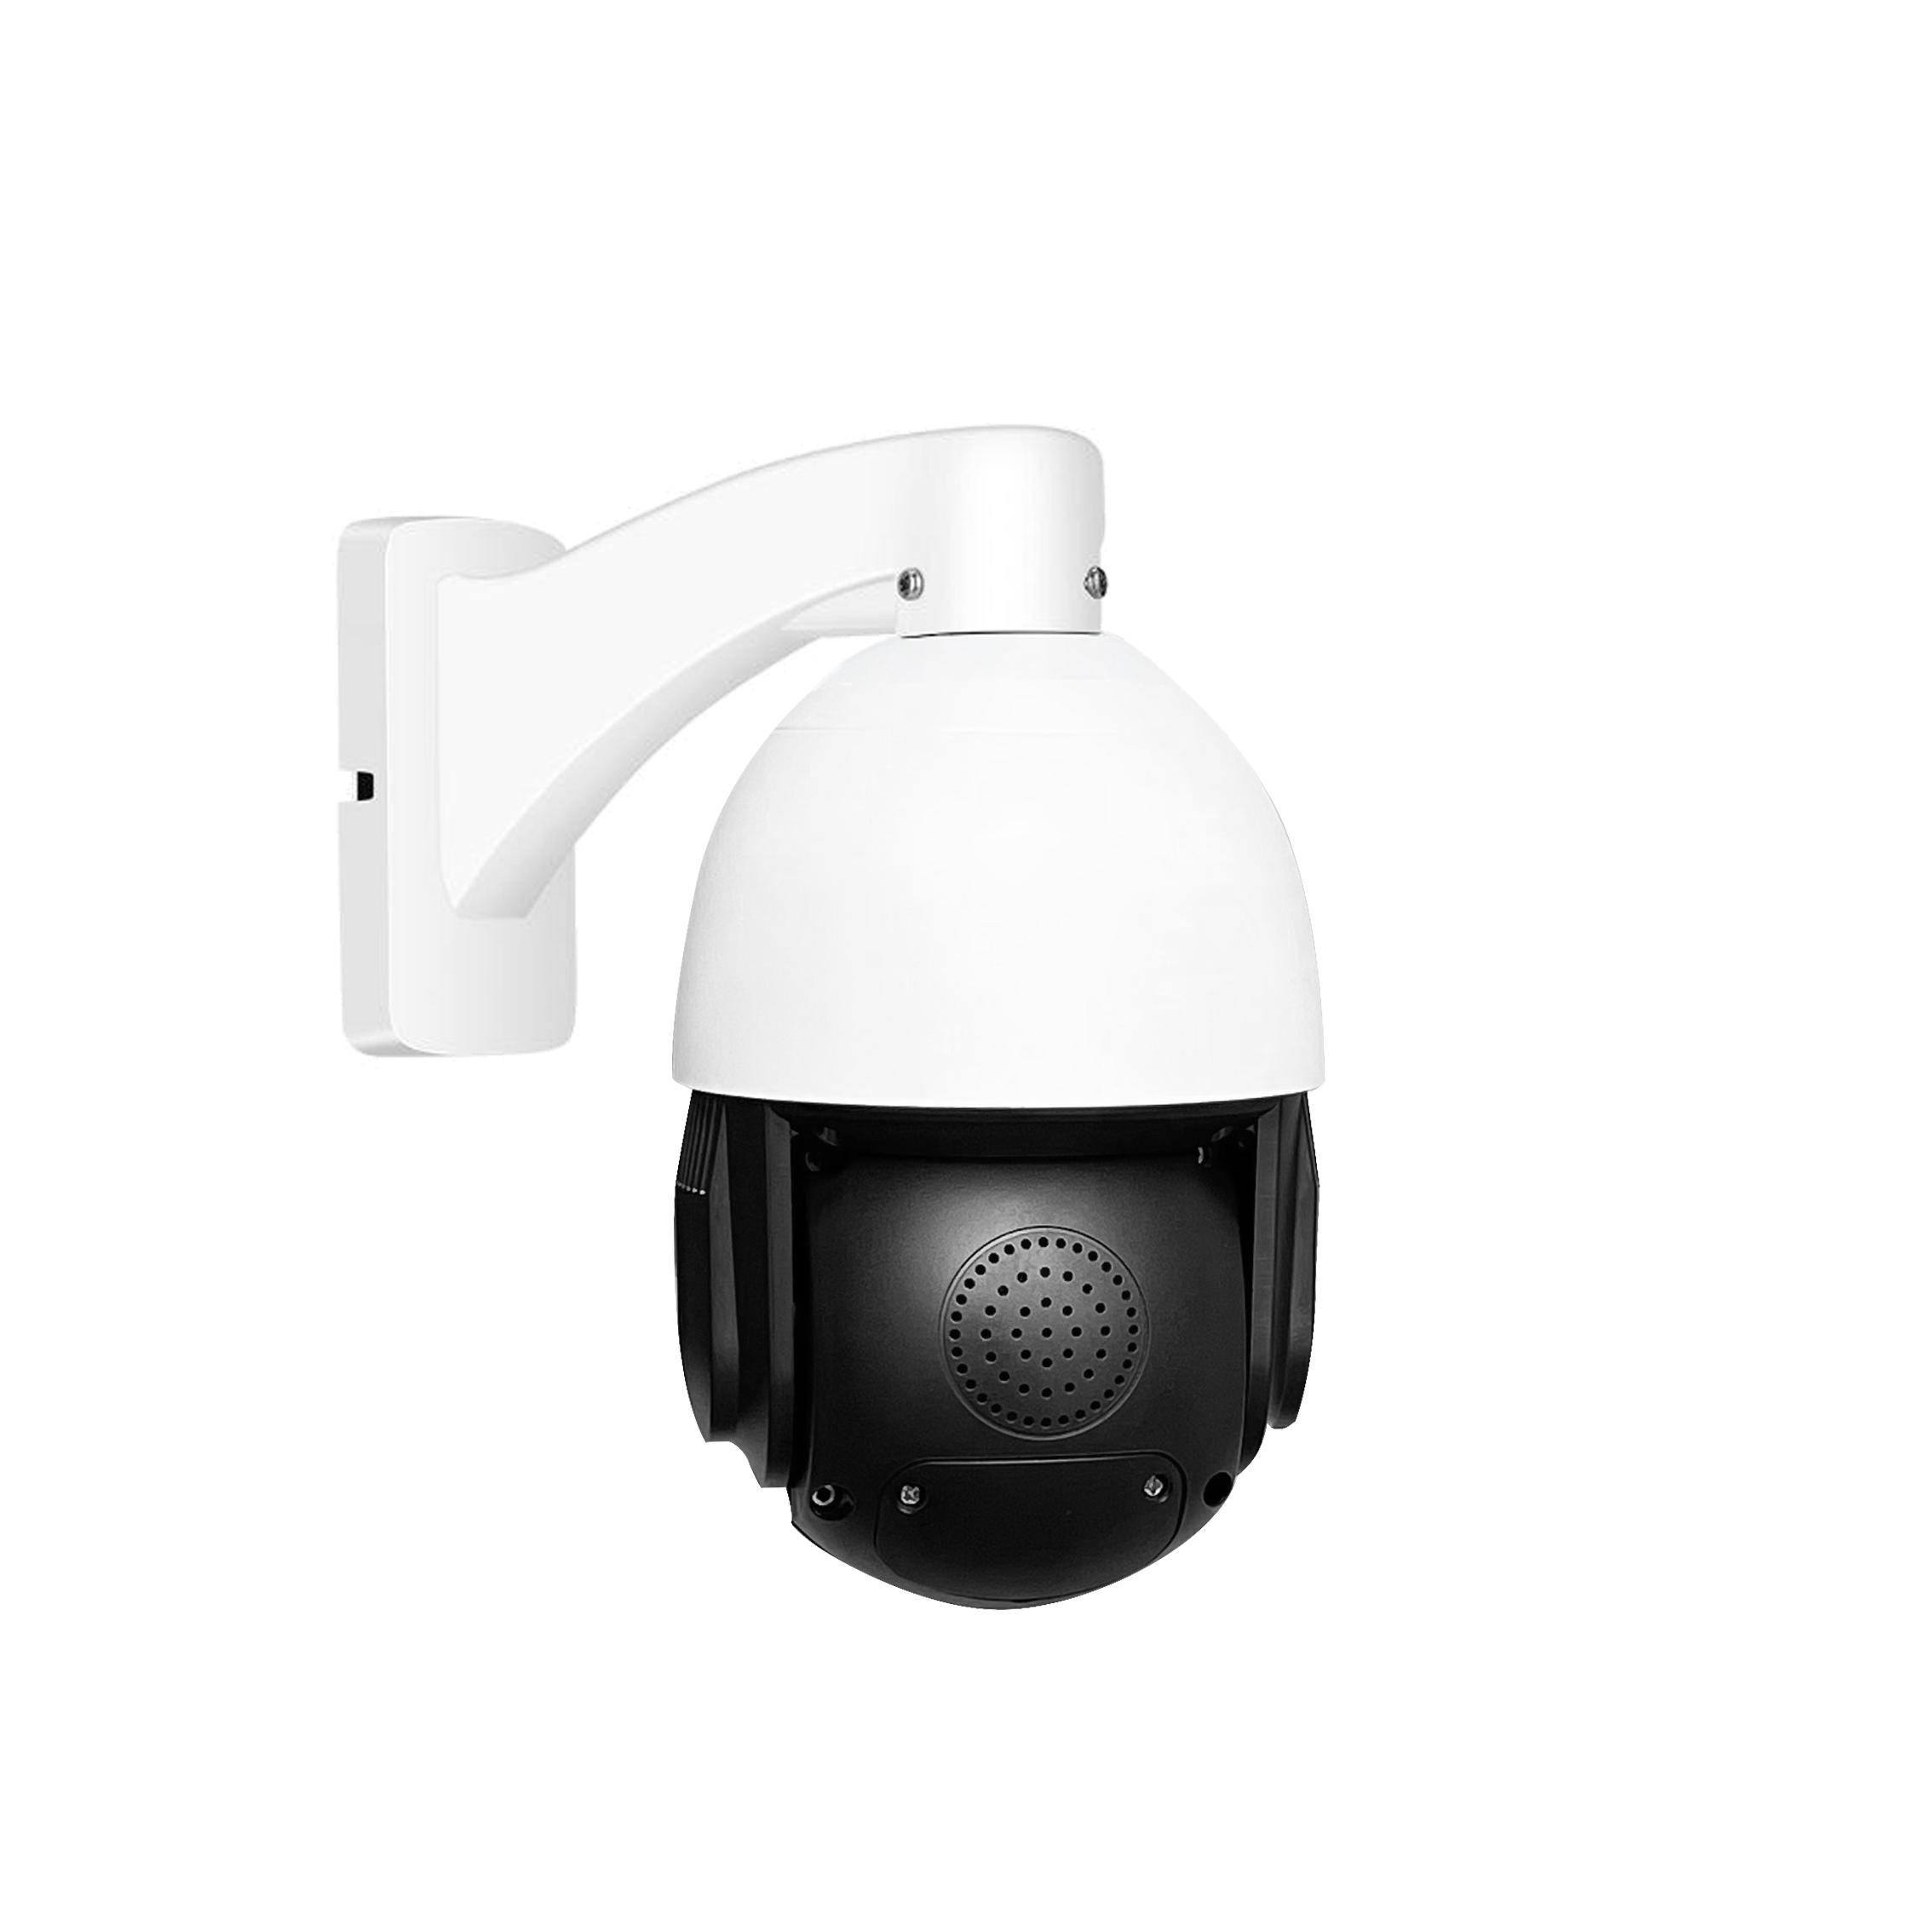 Microseven Open Source 6MP (3072x2048) Full Color Night Vision UltraHD PoE+ 20X Optical Zoom Pan Tilt Speed Dome IP Camera, Human & Vehicle Motion Detection & Auto Tracking, Indoor / Outdoor PTZ Camera, WDR, DNR, Sony CMOS, IP66 Weatherproof, Built-in 256GB SDcard Slot, Two-Way Audio, Auto Cruise, Web GUI & Apps, VMS (Video Management System),  Cloud Storage + Broadcasting on YouTube, Facebook & Microseven.tv